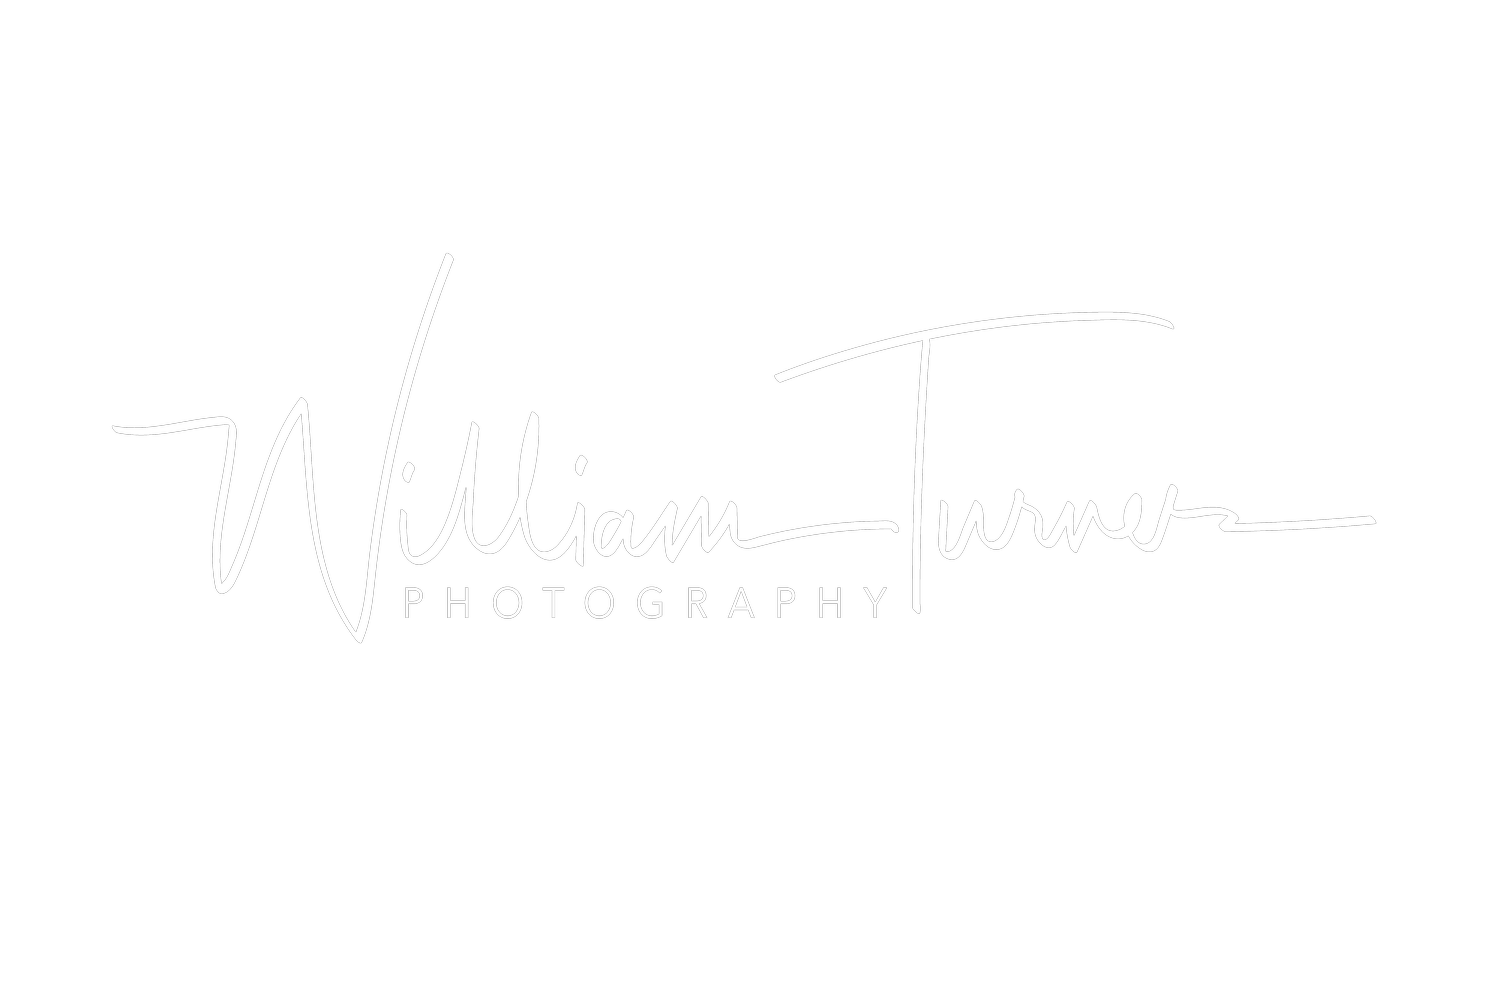 William Turner Photography, Award-Winning freelance photographer based in Lincolnshire, England. I am a highly qualified, award winning and published photographer with experience in differing types of photography including location based light painting photography, studio based cinematic portrait photography, landscape photography, wedding photography and advertisement photography.   In addition to my qualifications in photography, I am also a licenced drone pilot; this has allowed me to bring a new dimension to shoots I work upon in both photography &amp; videography. 